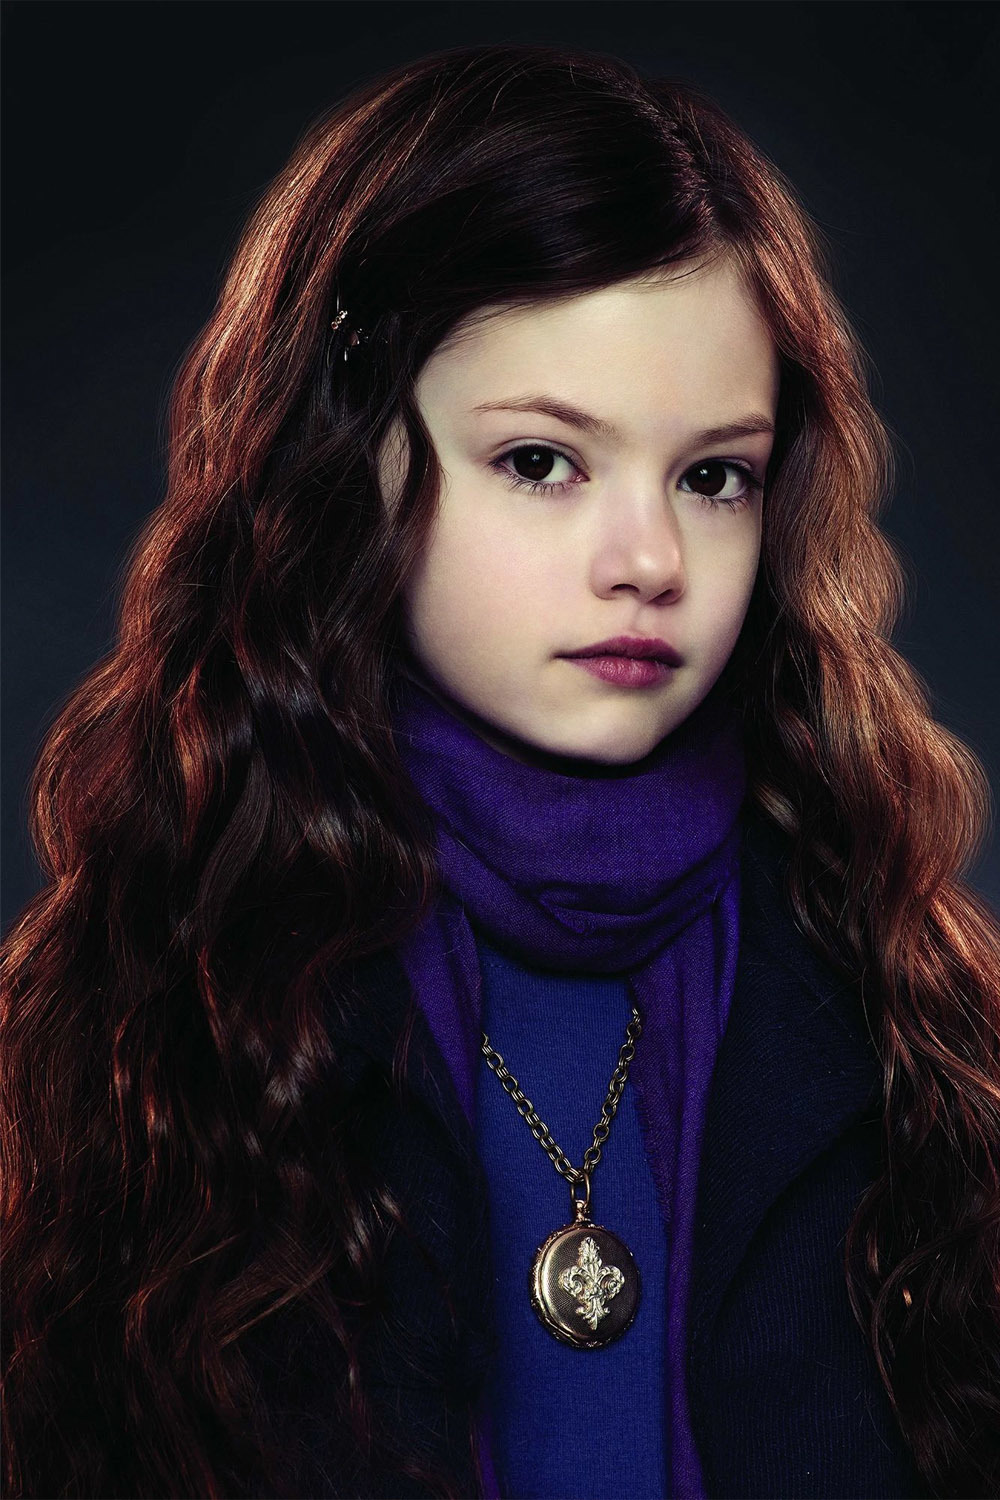  The little girl Renesmee in Twilight attracted audiences with her pretty appearance. (Photo: Film material)